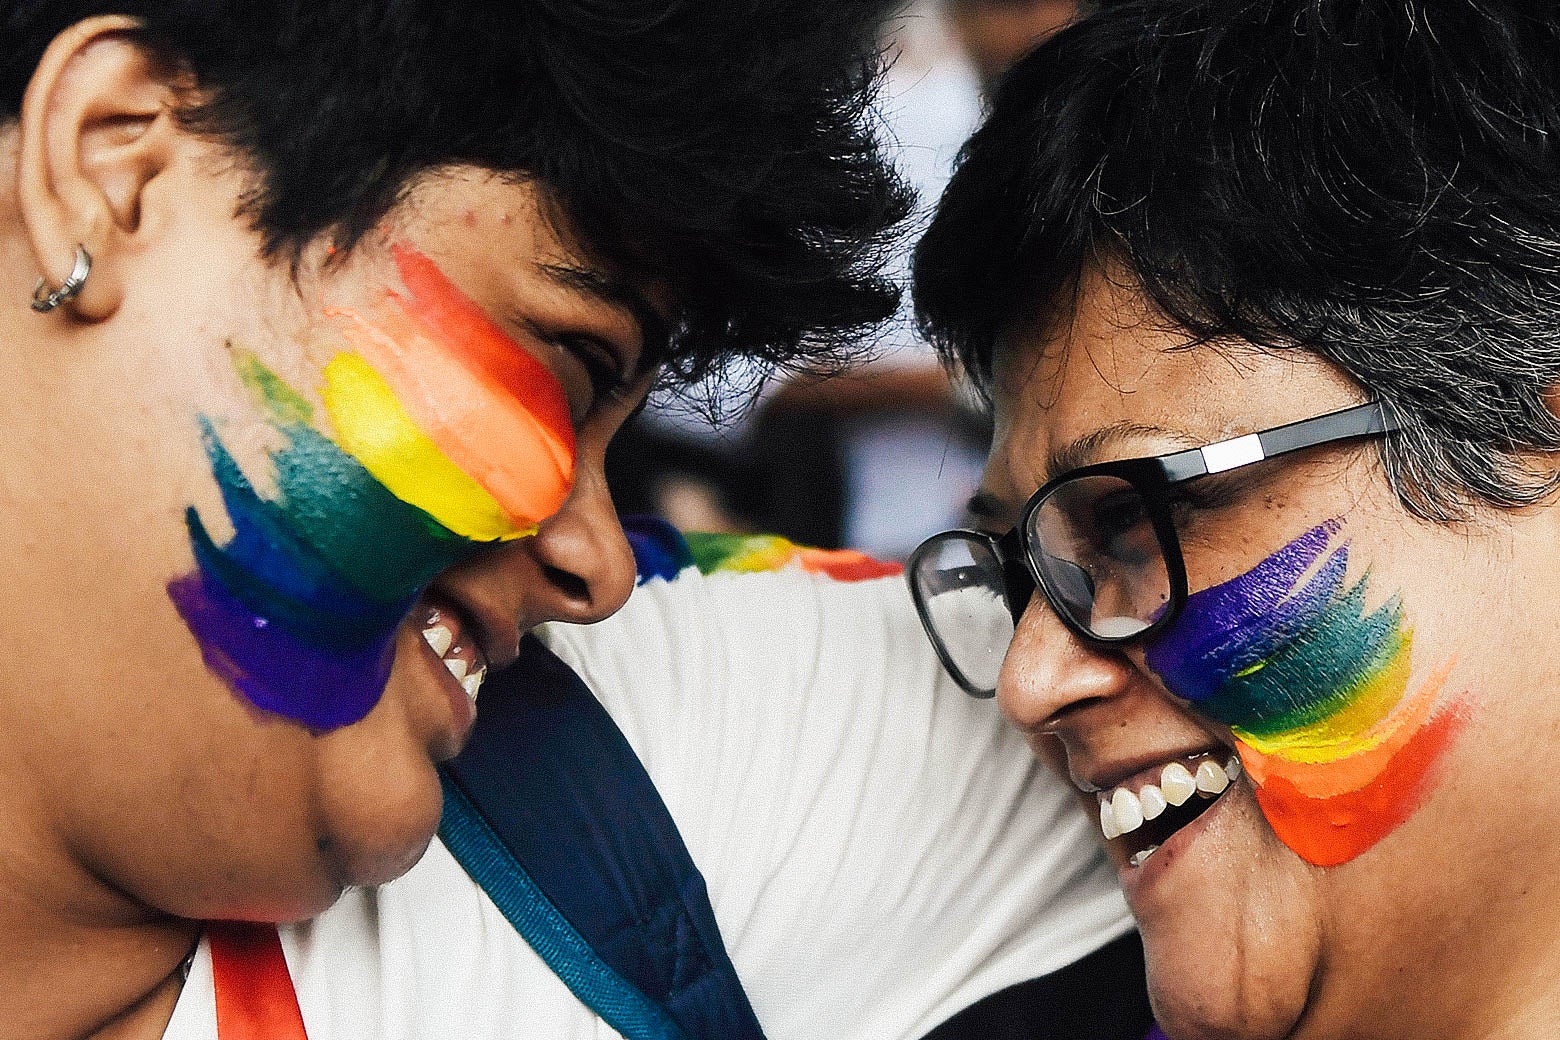 Two Indian supporters of the LGBTQ community celebrate with smiles and rainbow flag face paint on Thursday.